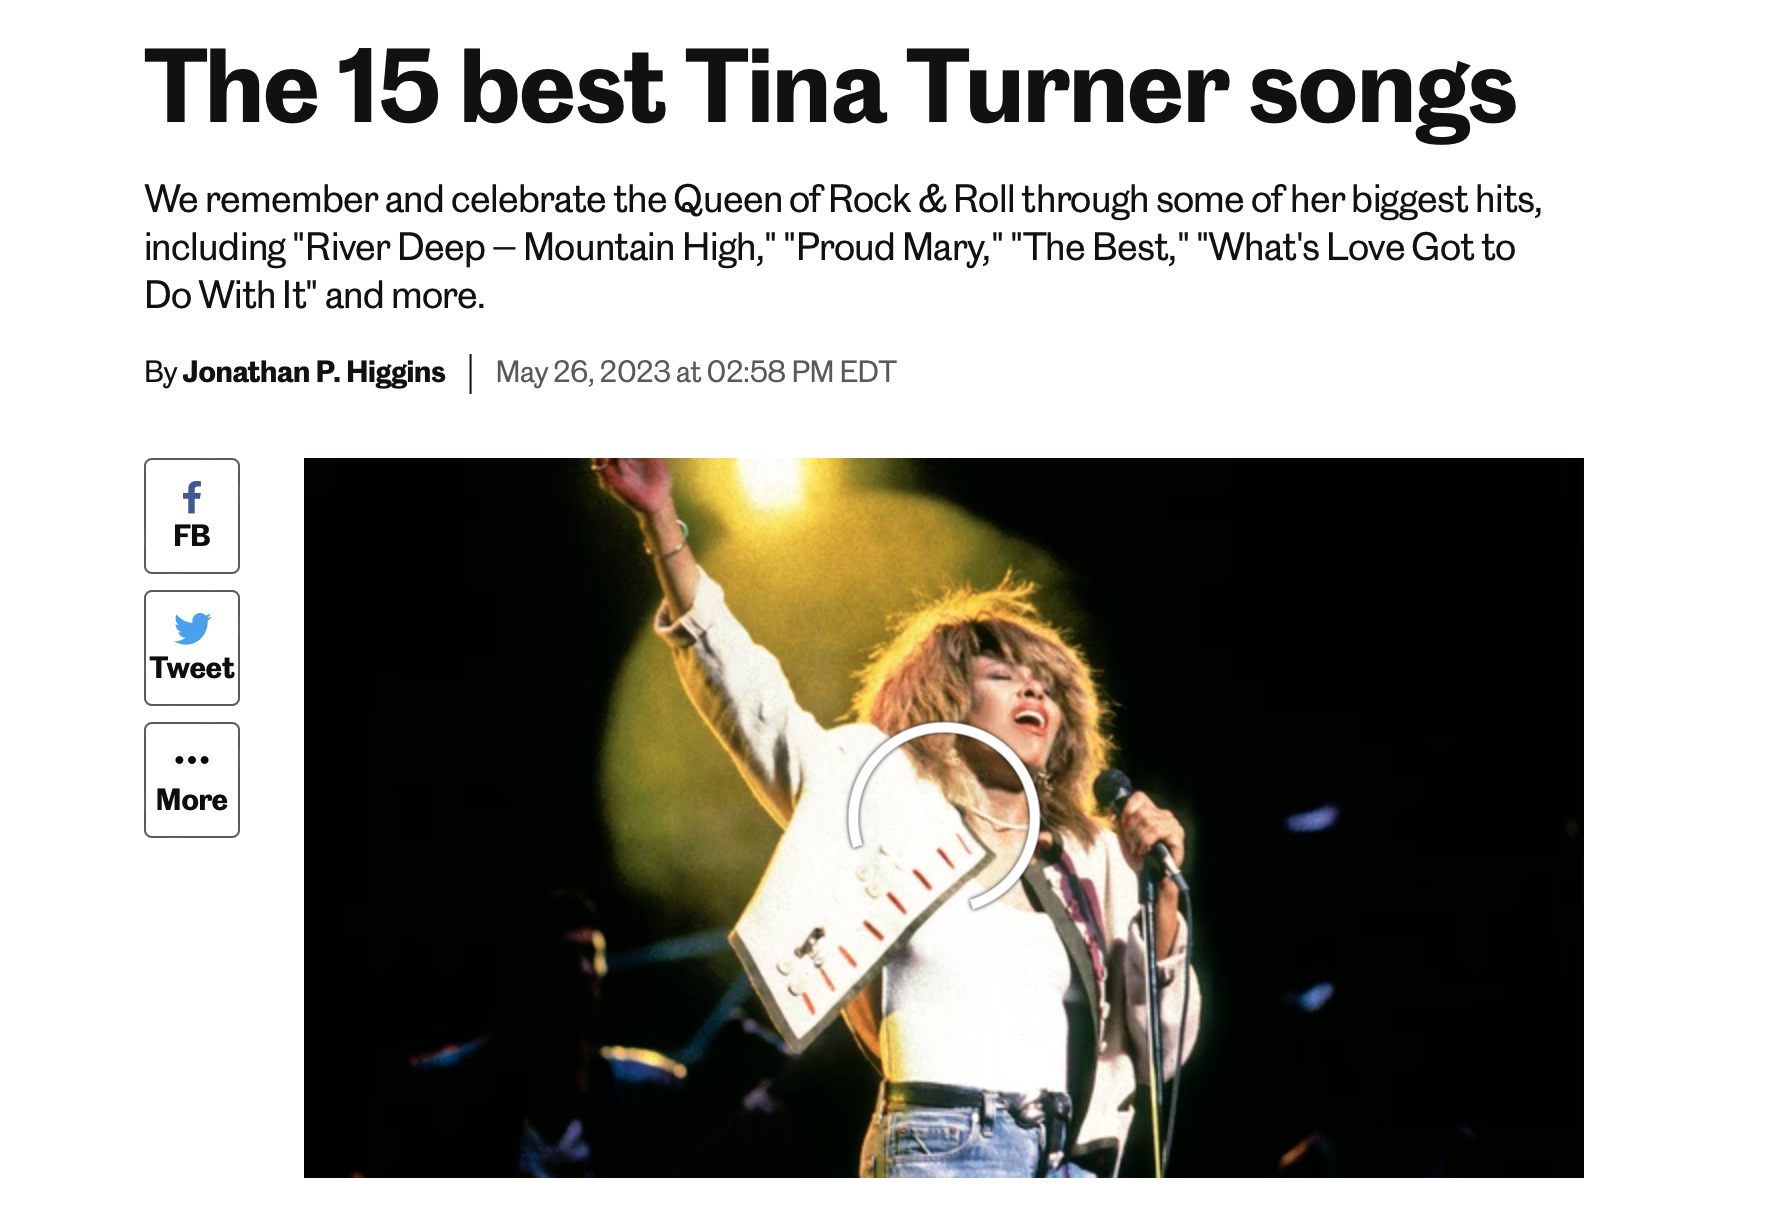 The 15 best Tina Turner songs thumbnail